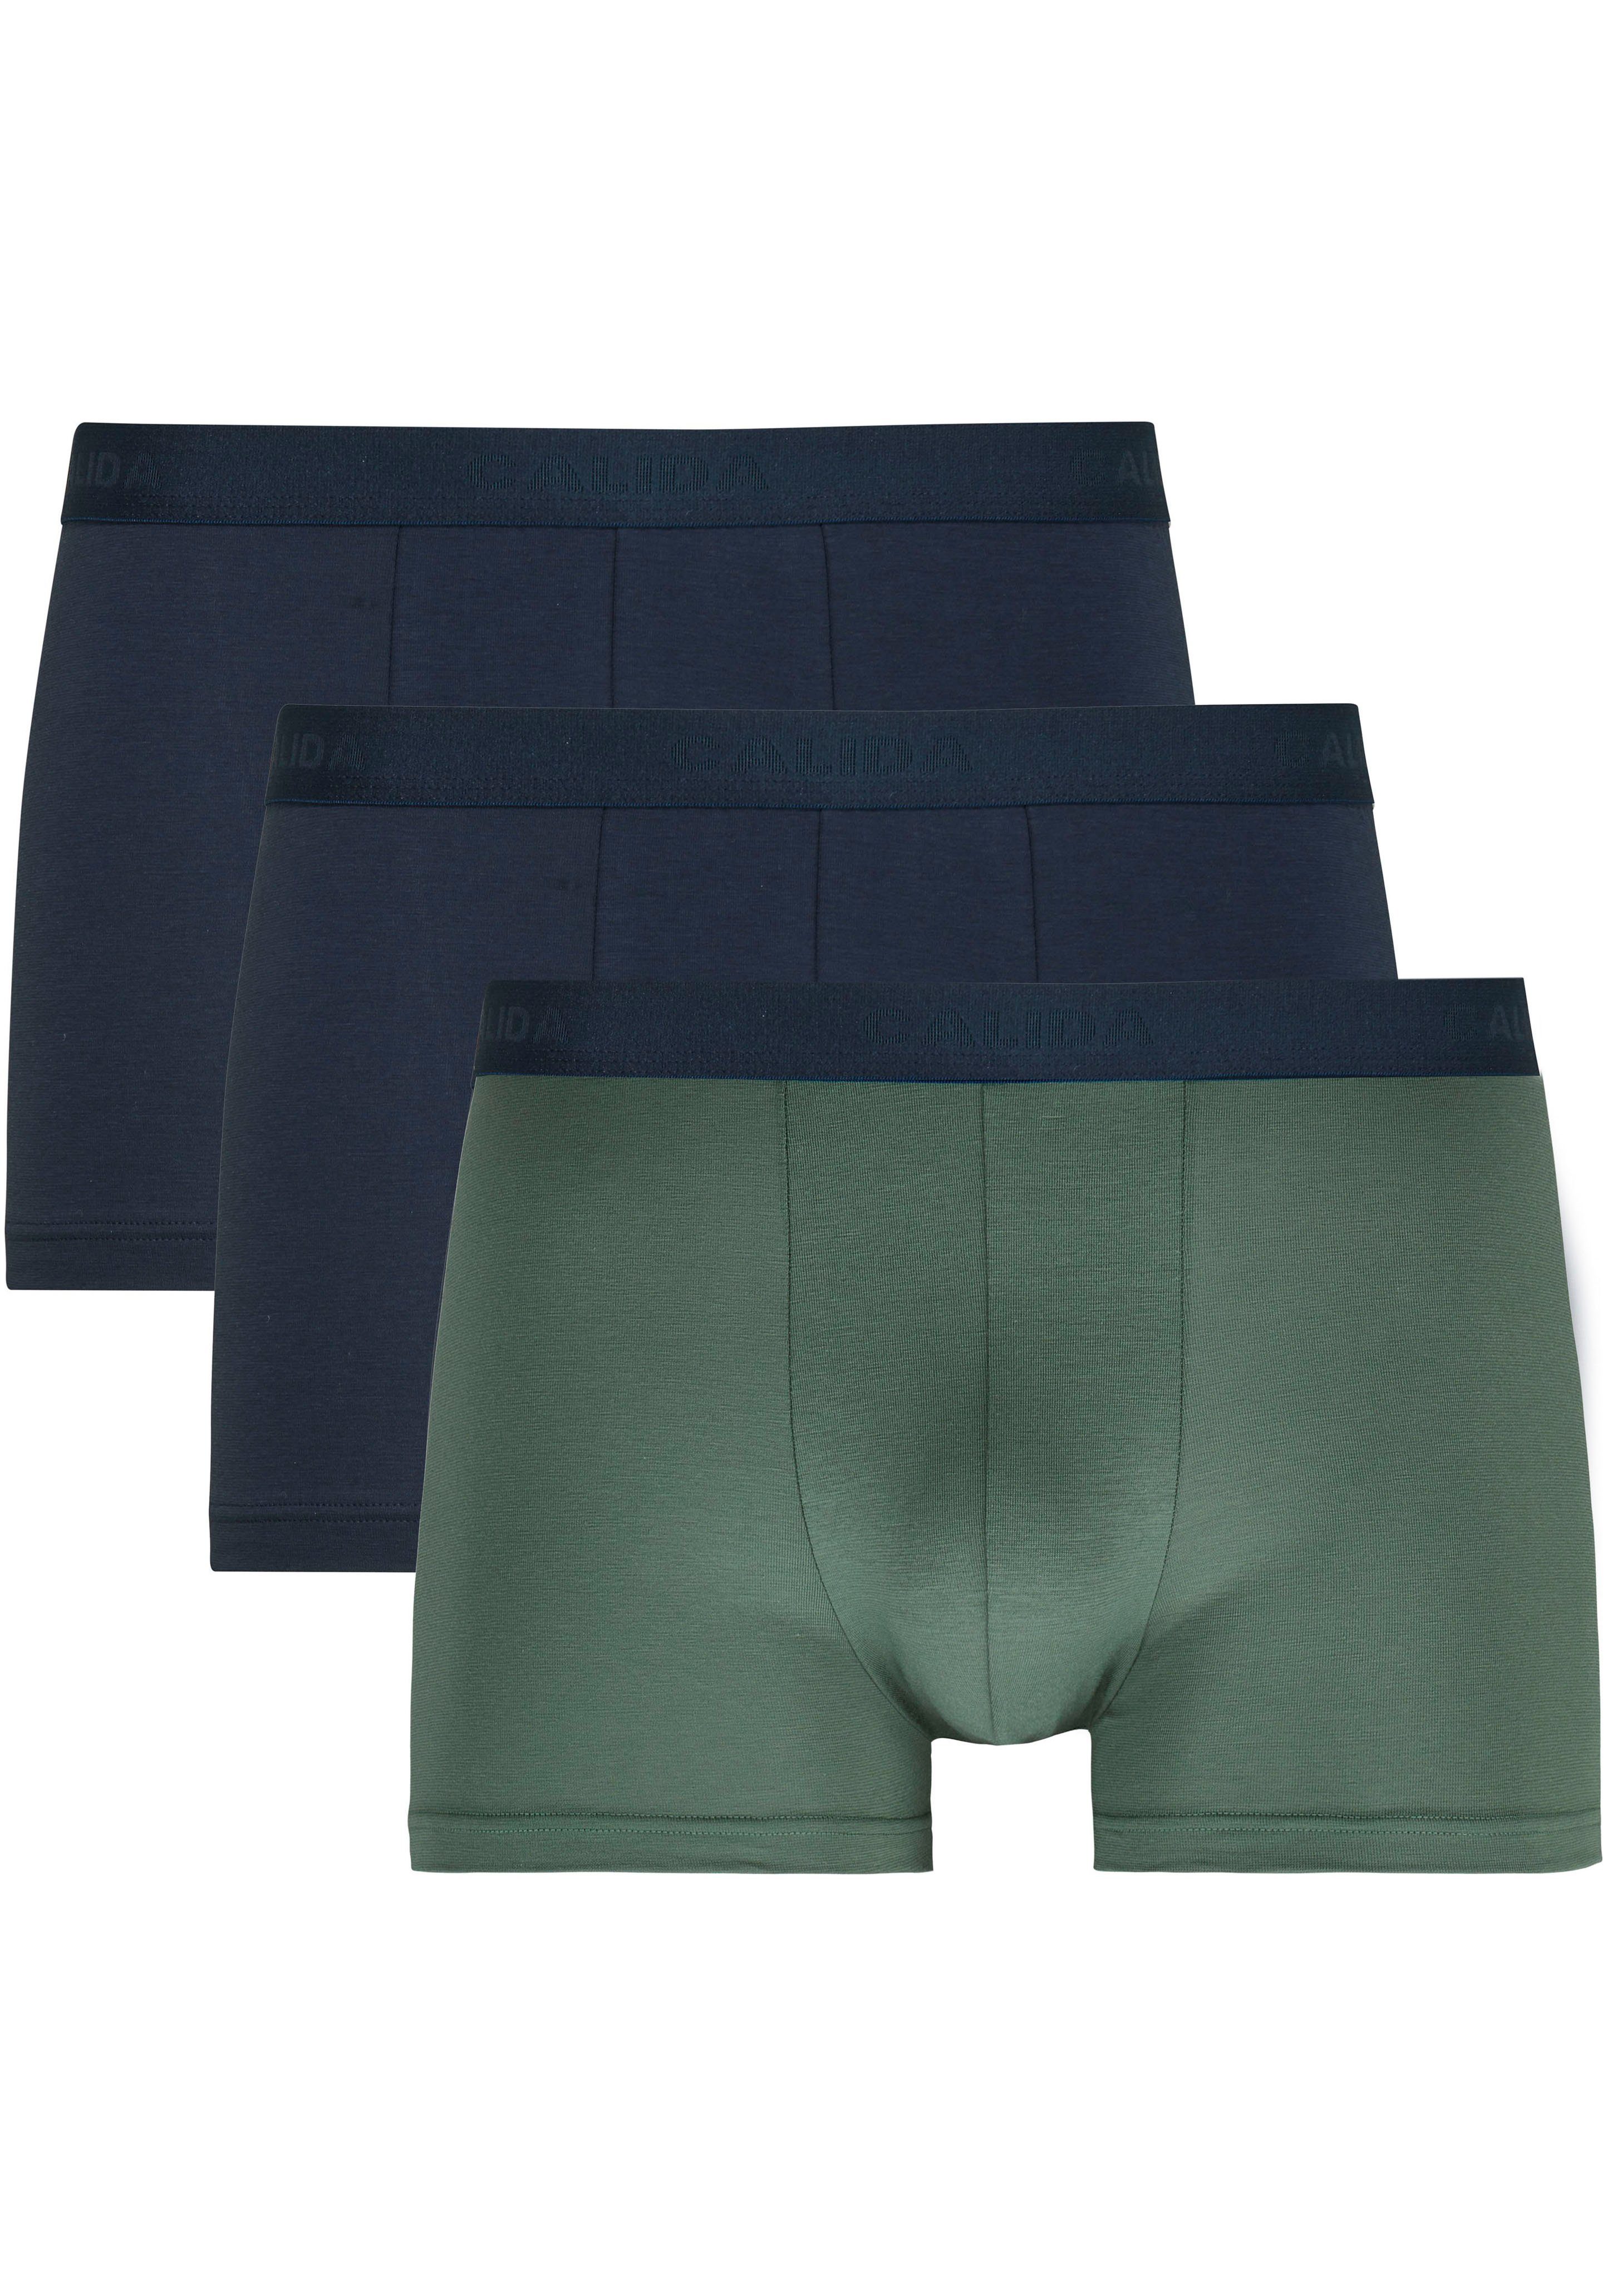 CALIDA Boxer Natural Benefit (Packung, 3-St) Boxer-Brief formstabile Single Jersey-Qualität